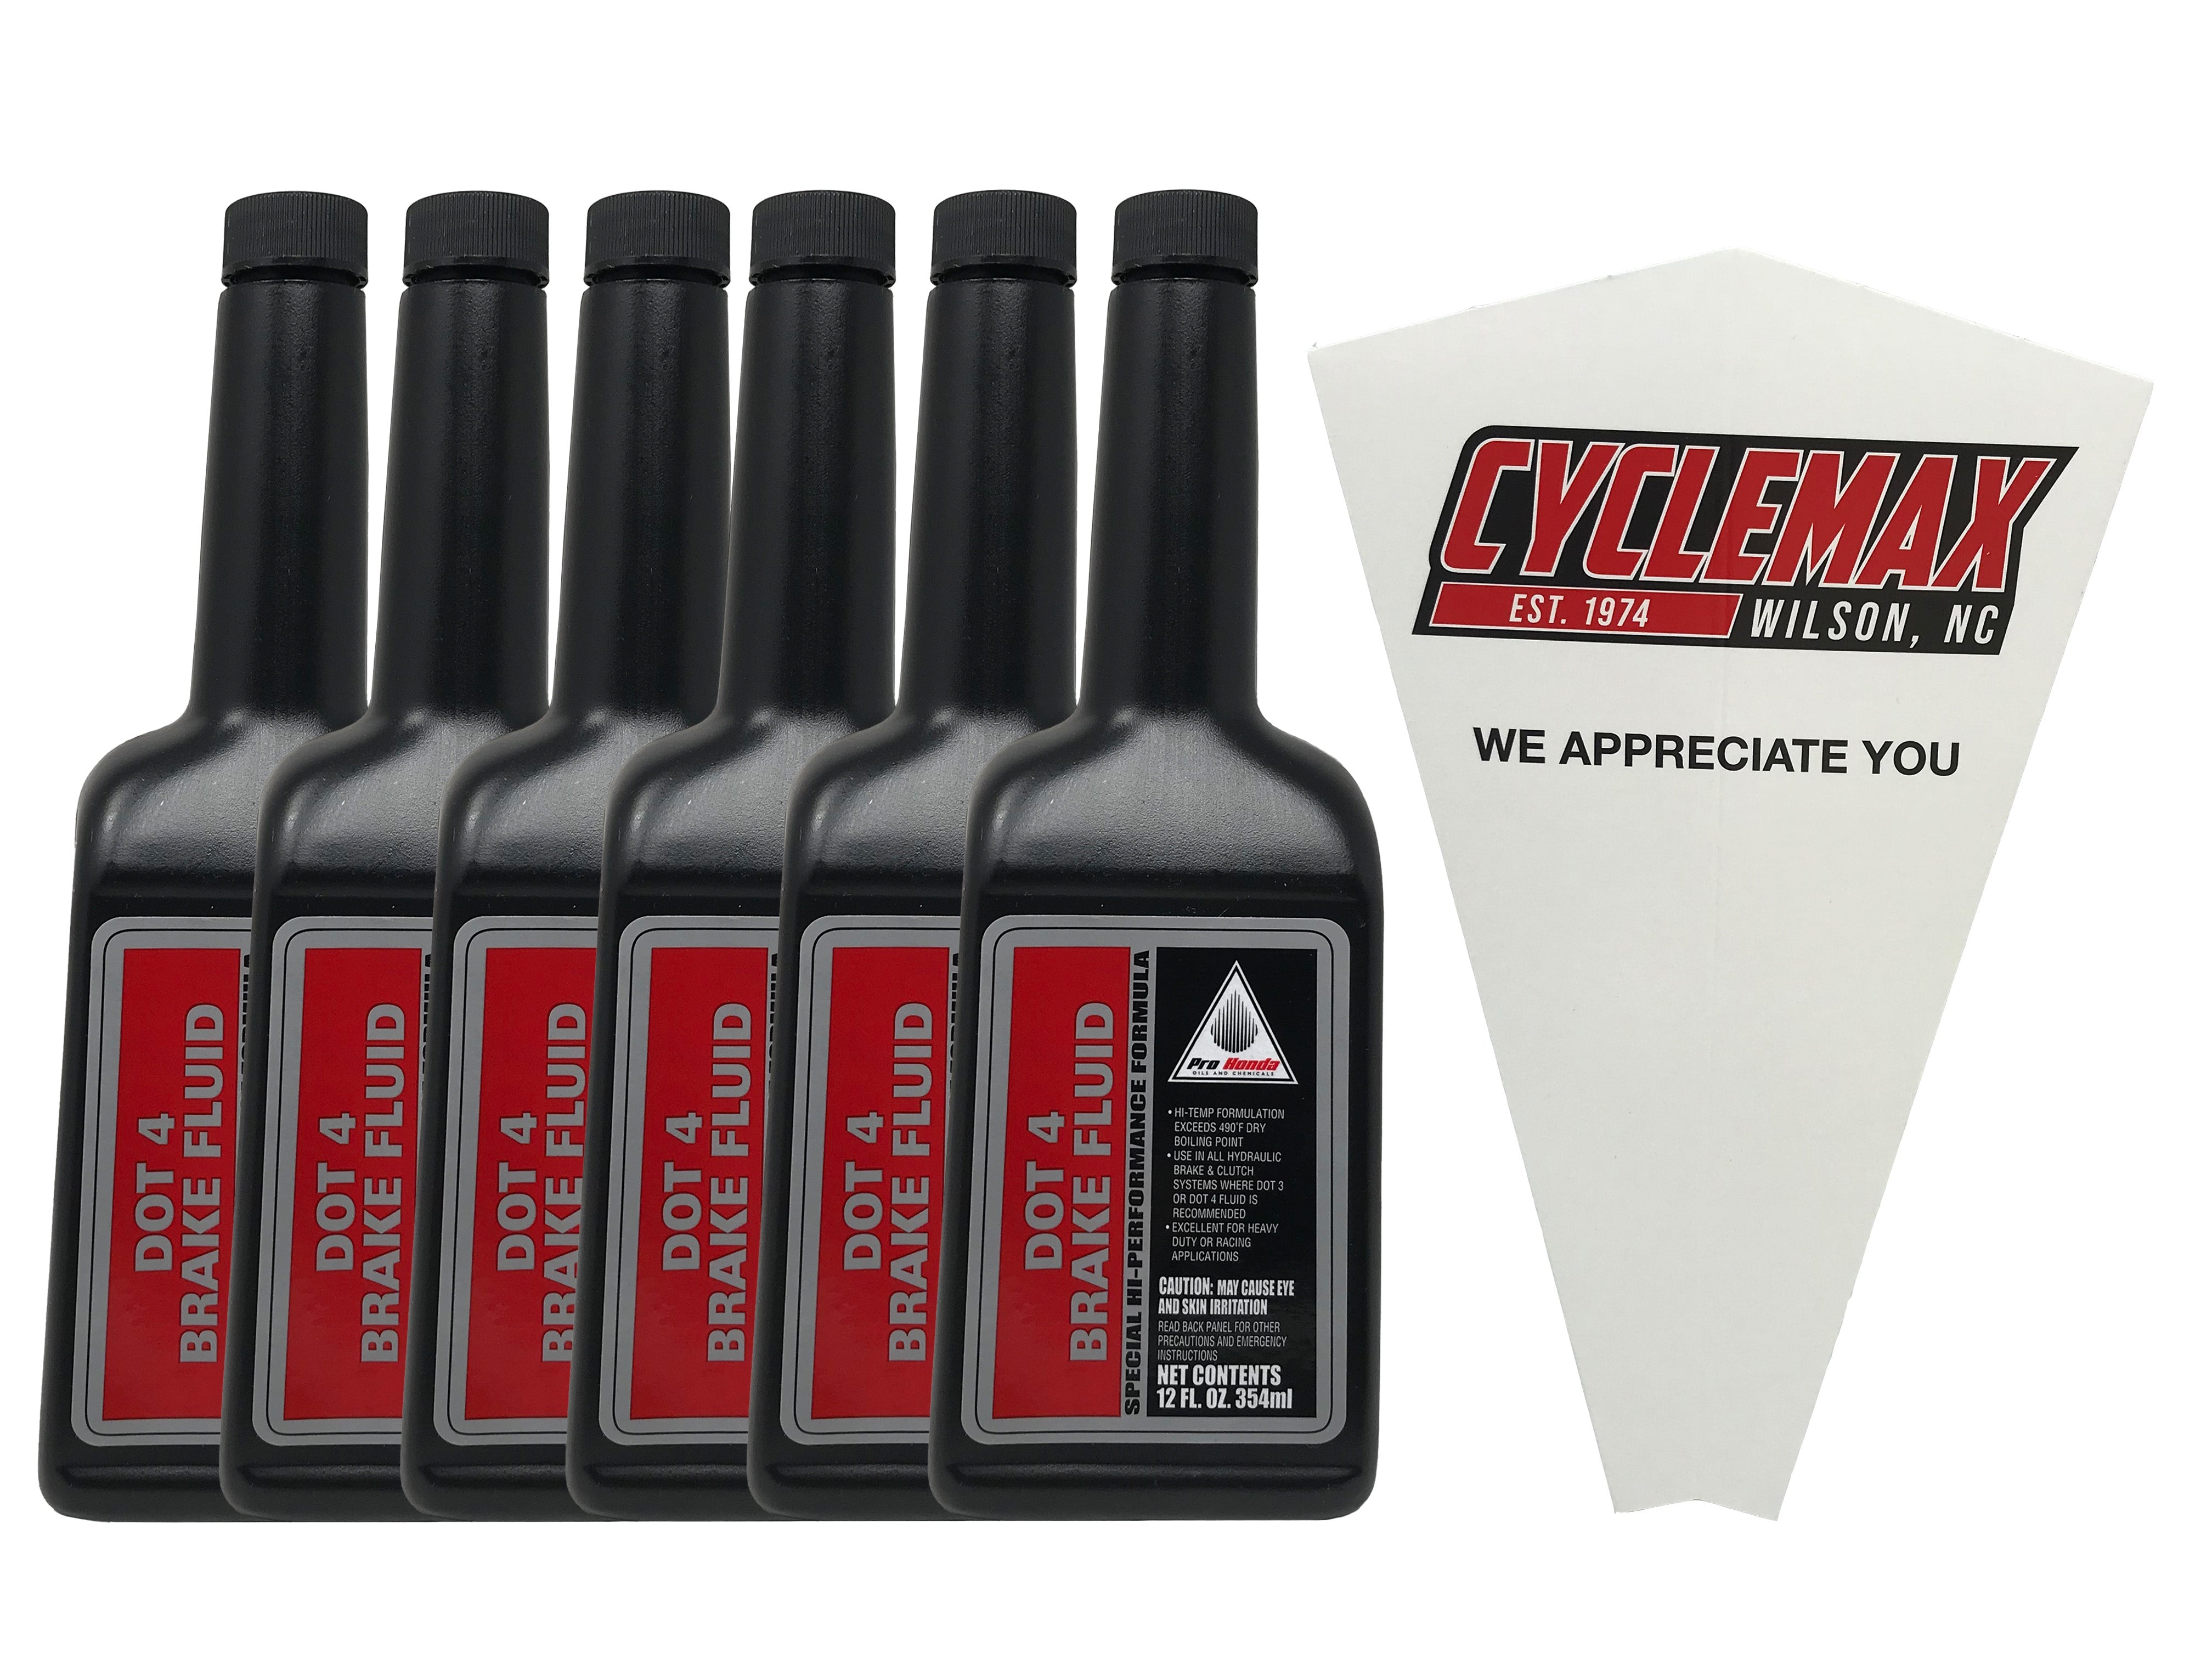 CYCLEMAX Six Pack for Honda DOT 4 Brake Fluid 08203-0004 Contains Six 12oz Bottles and a Funnel